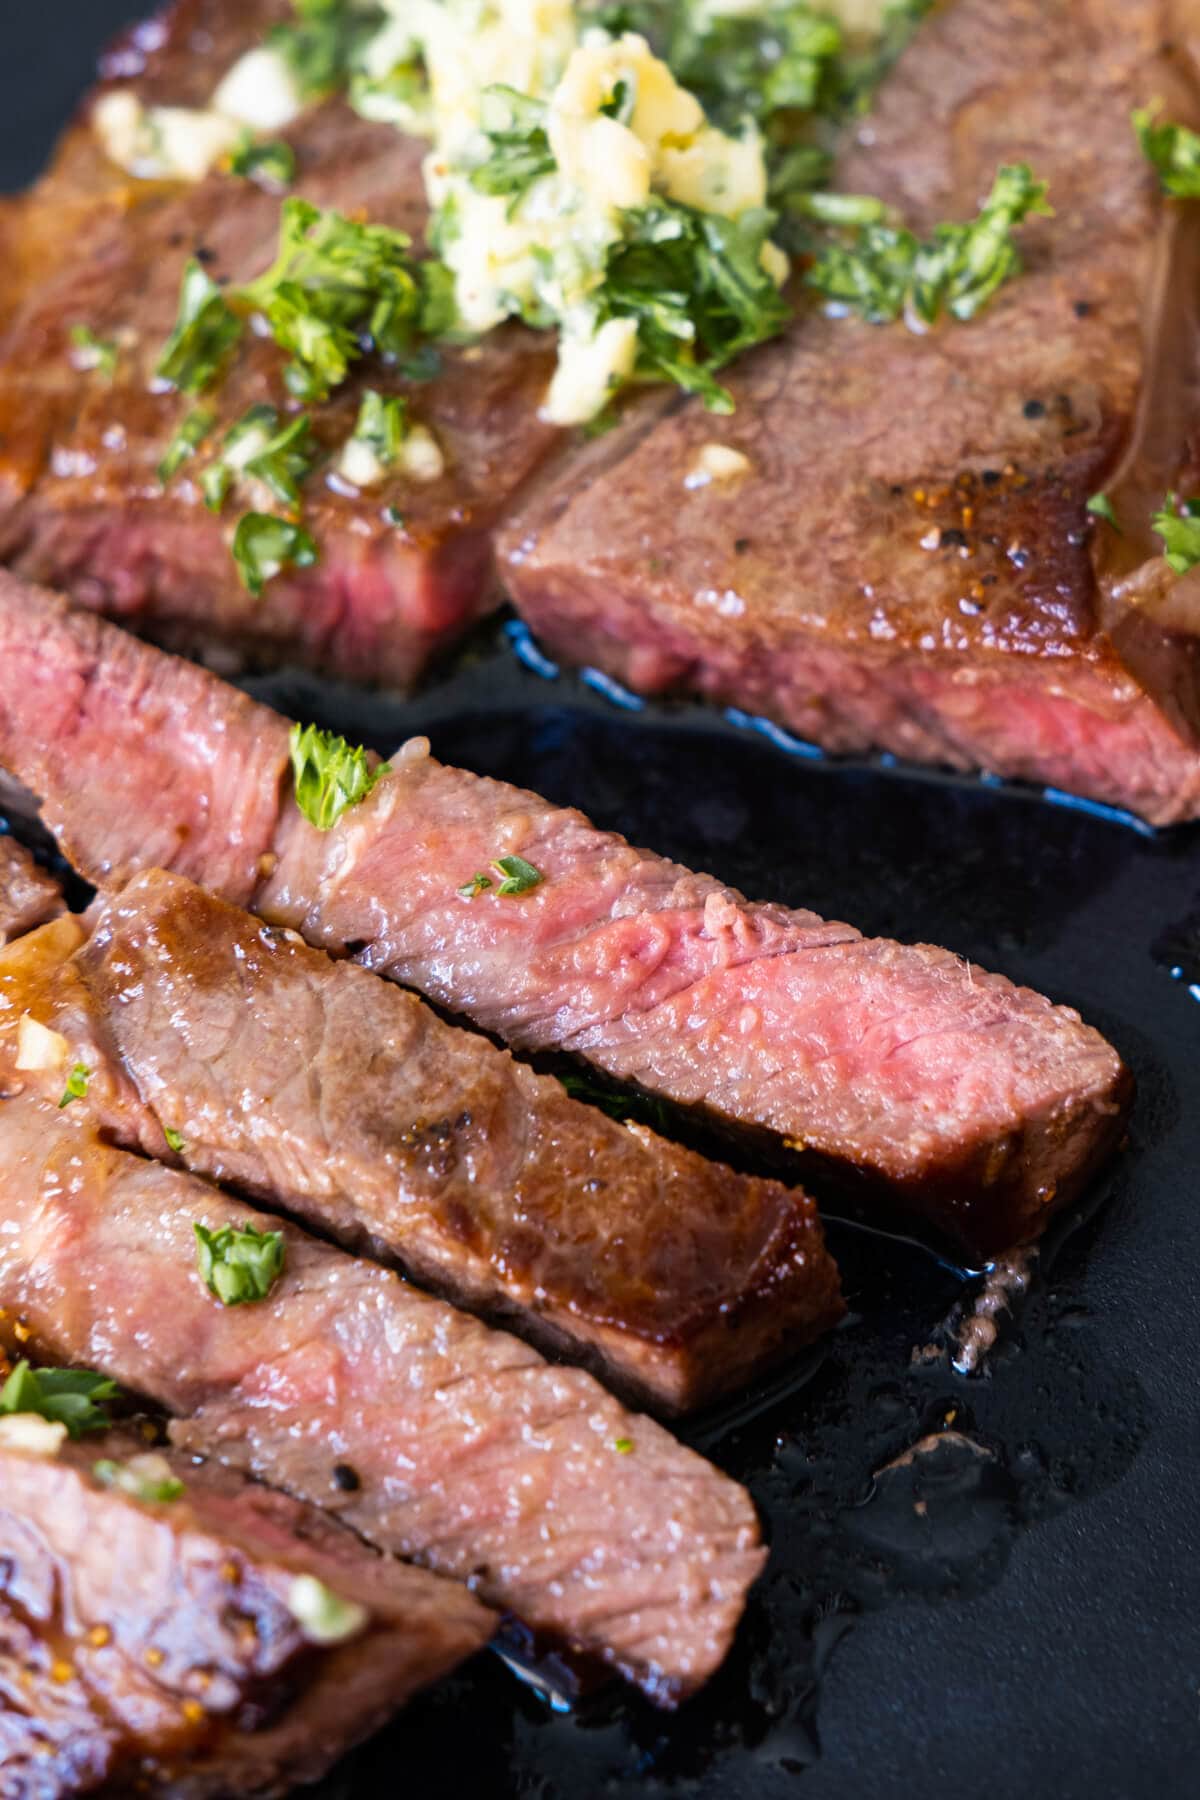 Soft and tender wagyu beef cut into slices and topped with garlic butter and chopped parsley.